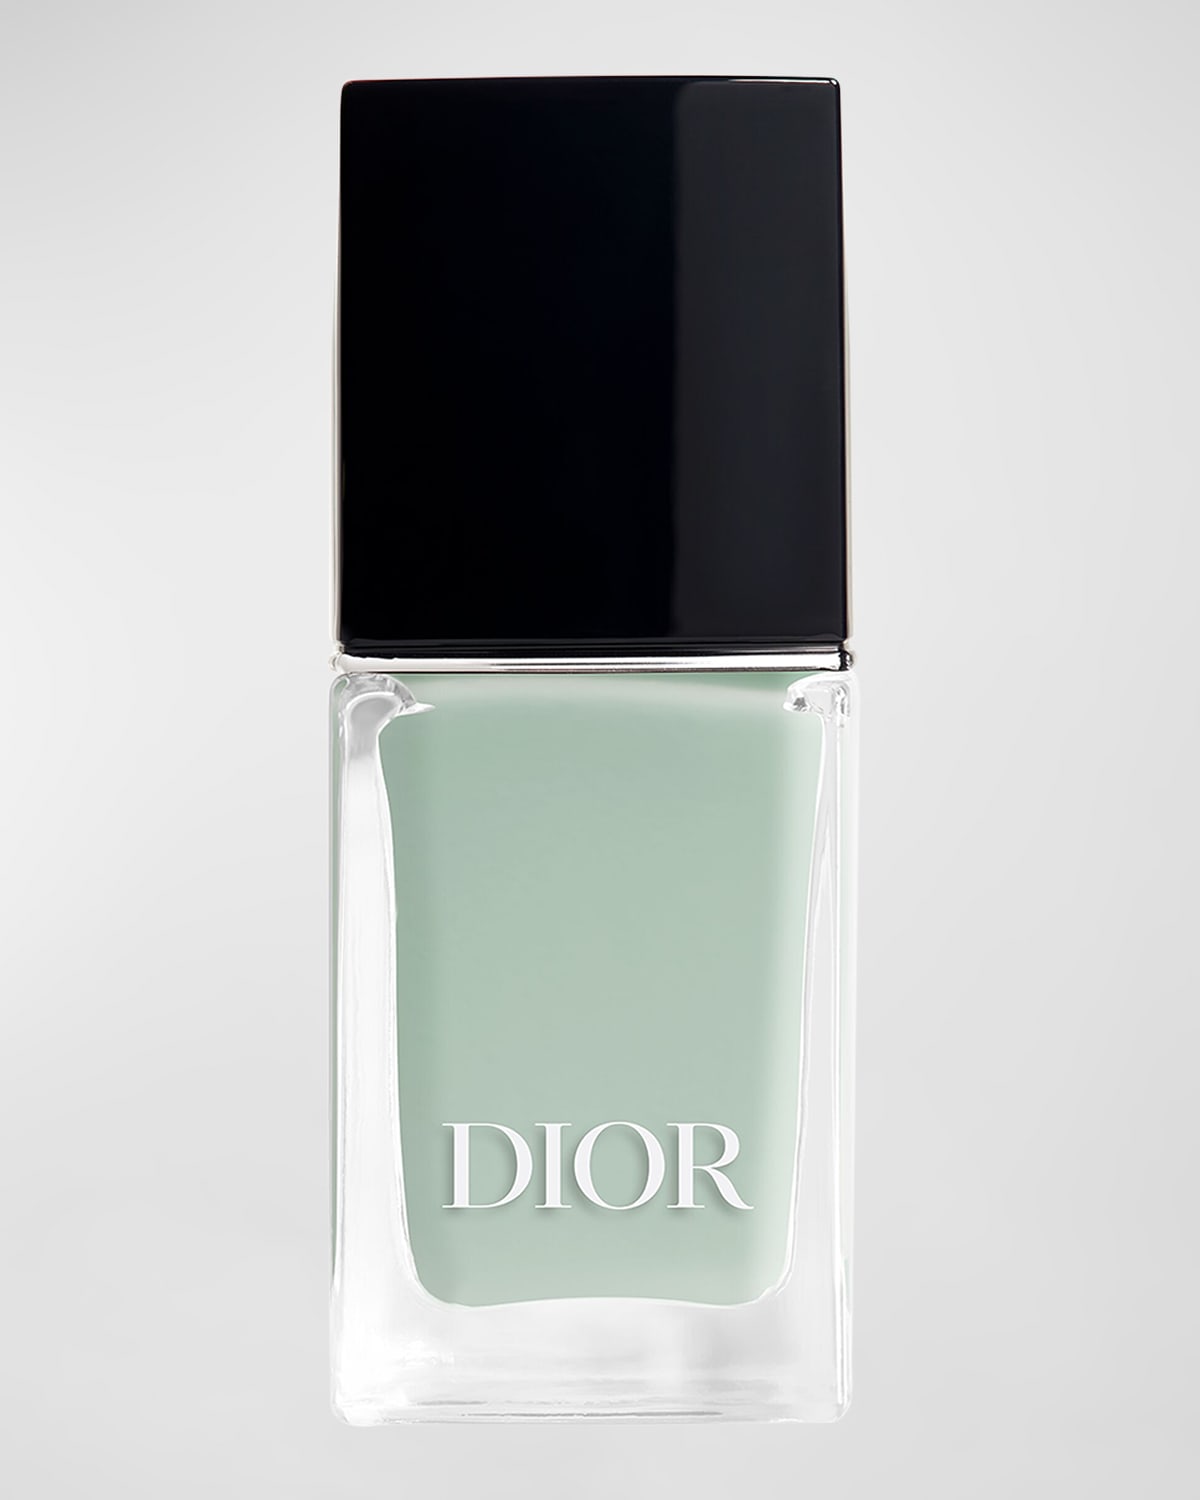 Limited Edition Dior Vernis Nail Polish with Gel Effect and Couture Color